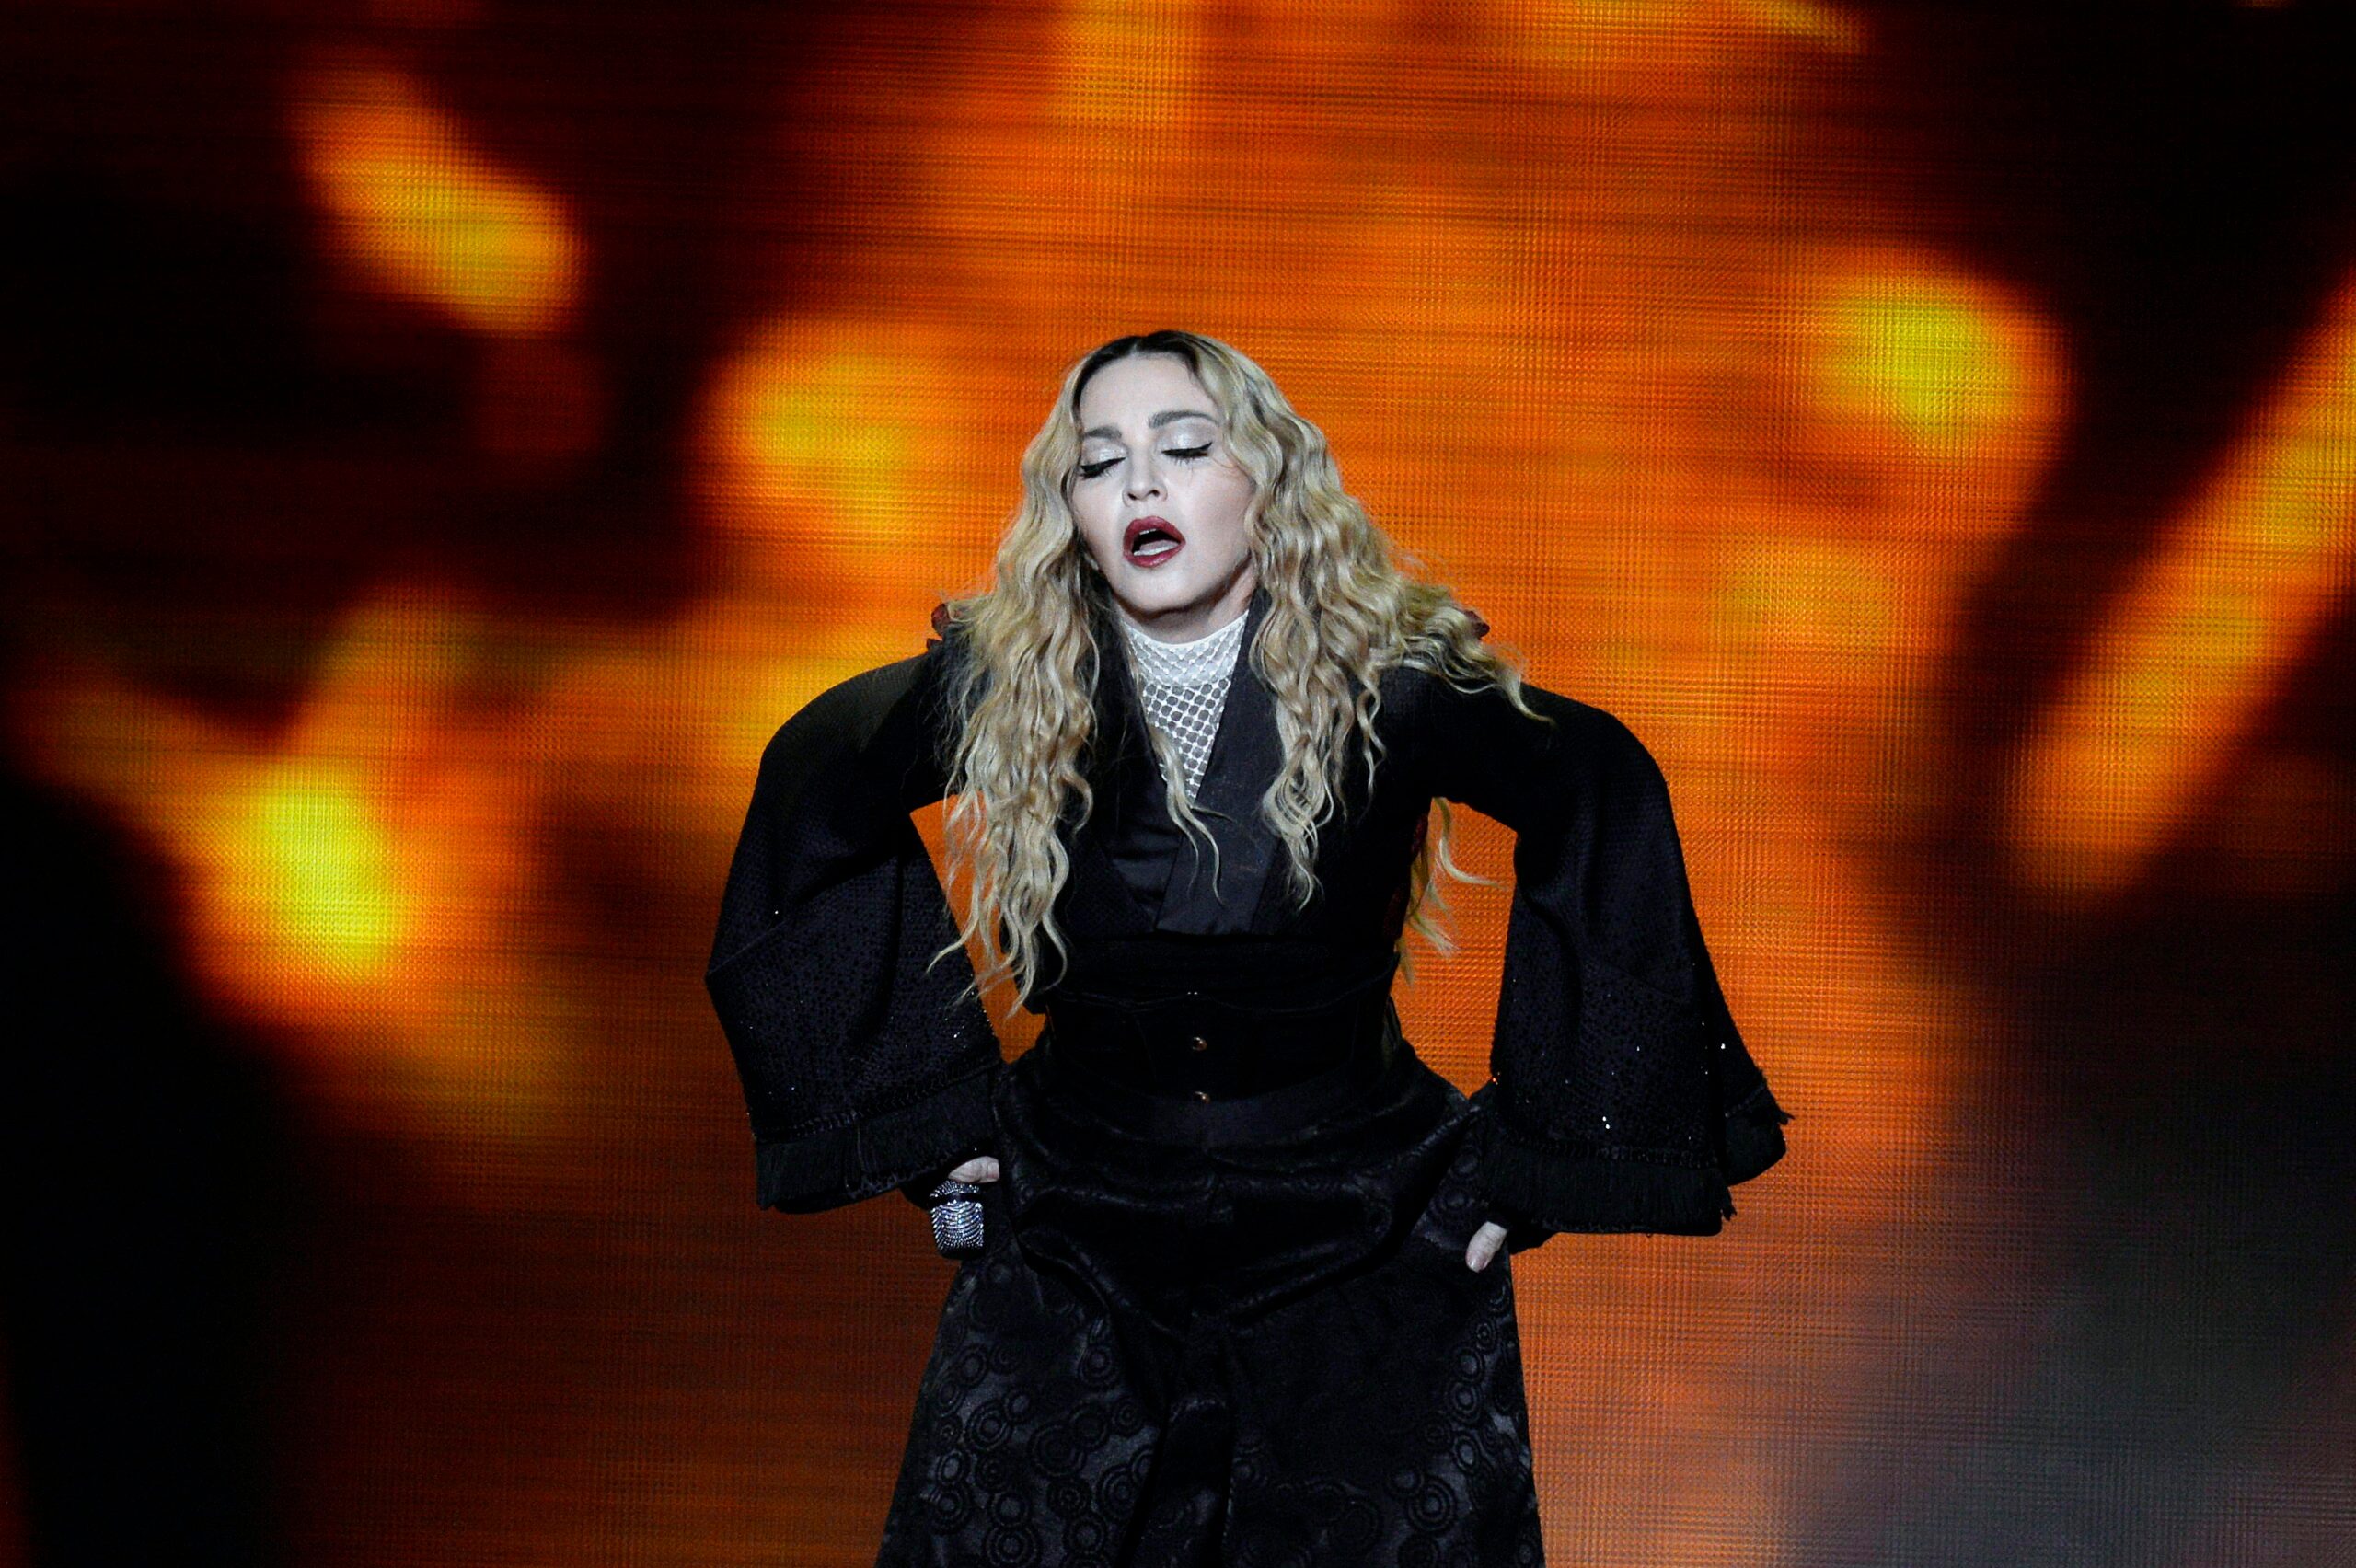 IN PHOTOS: Madonna’s ‘Rebel Heart’ concert live in Manila, day 1